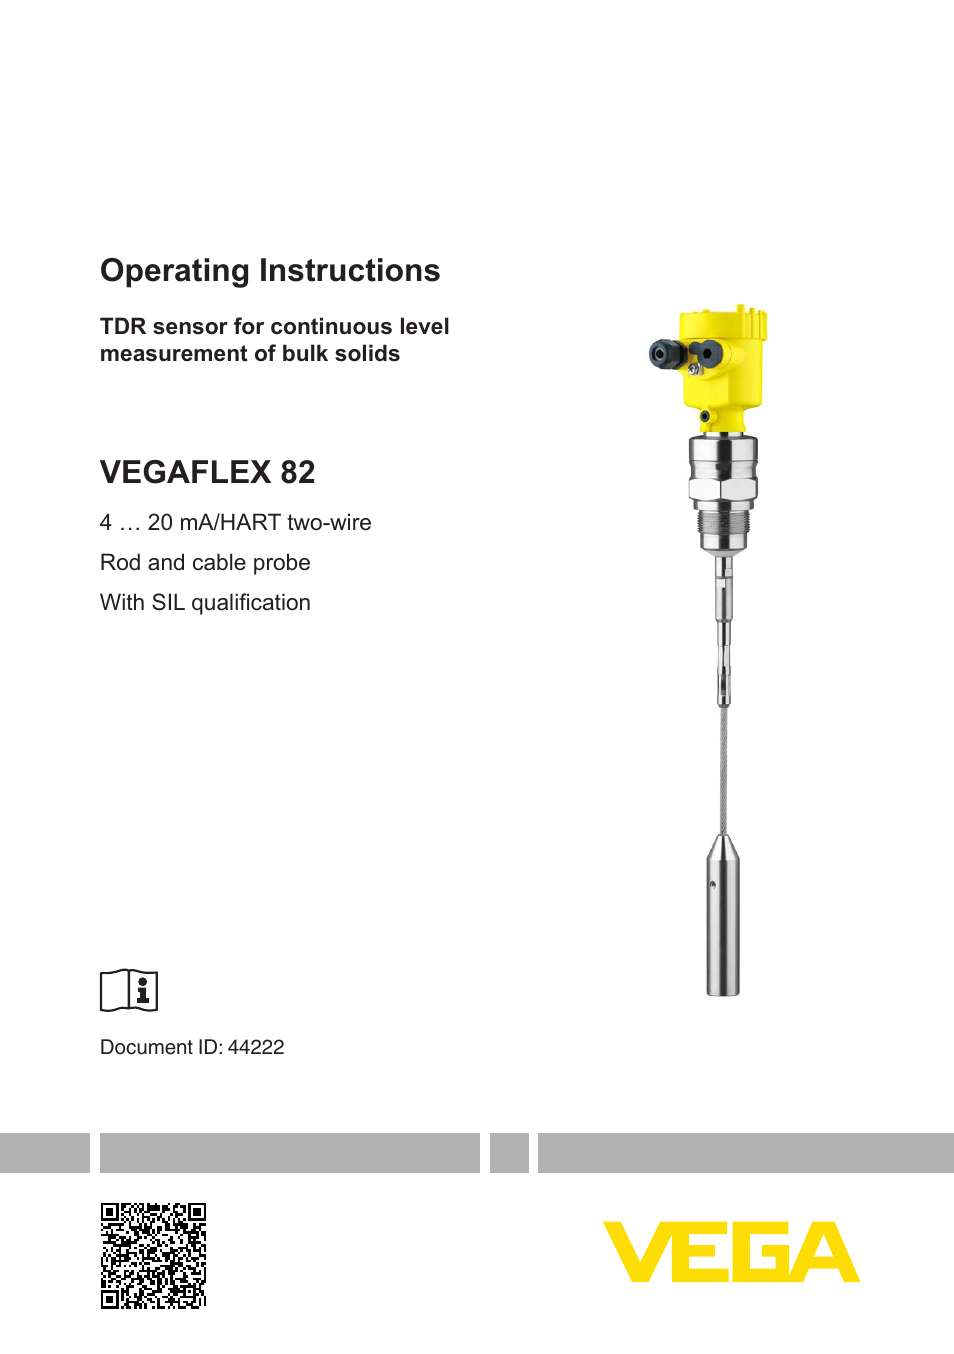 VEGAFLEX 82 4 … 20 mA_HART two-wire   Rod and cable probe With SIL qualification